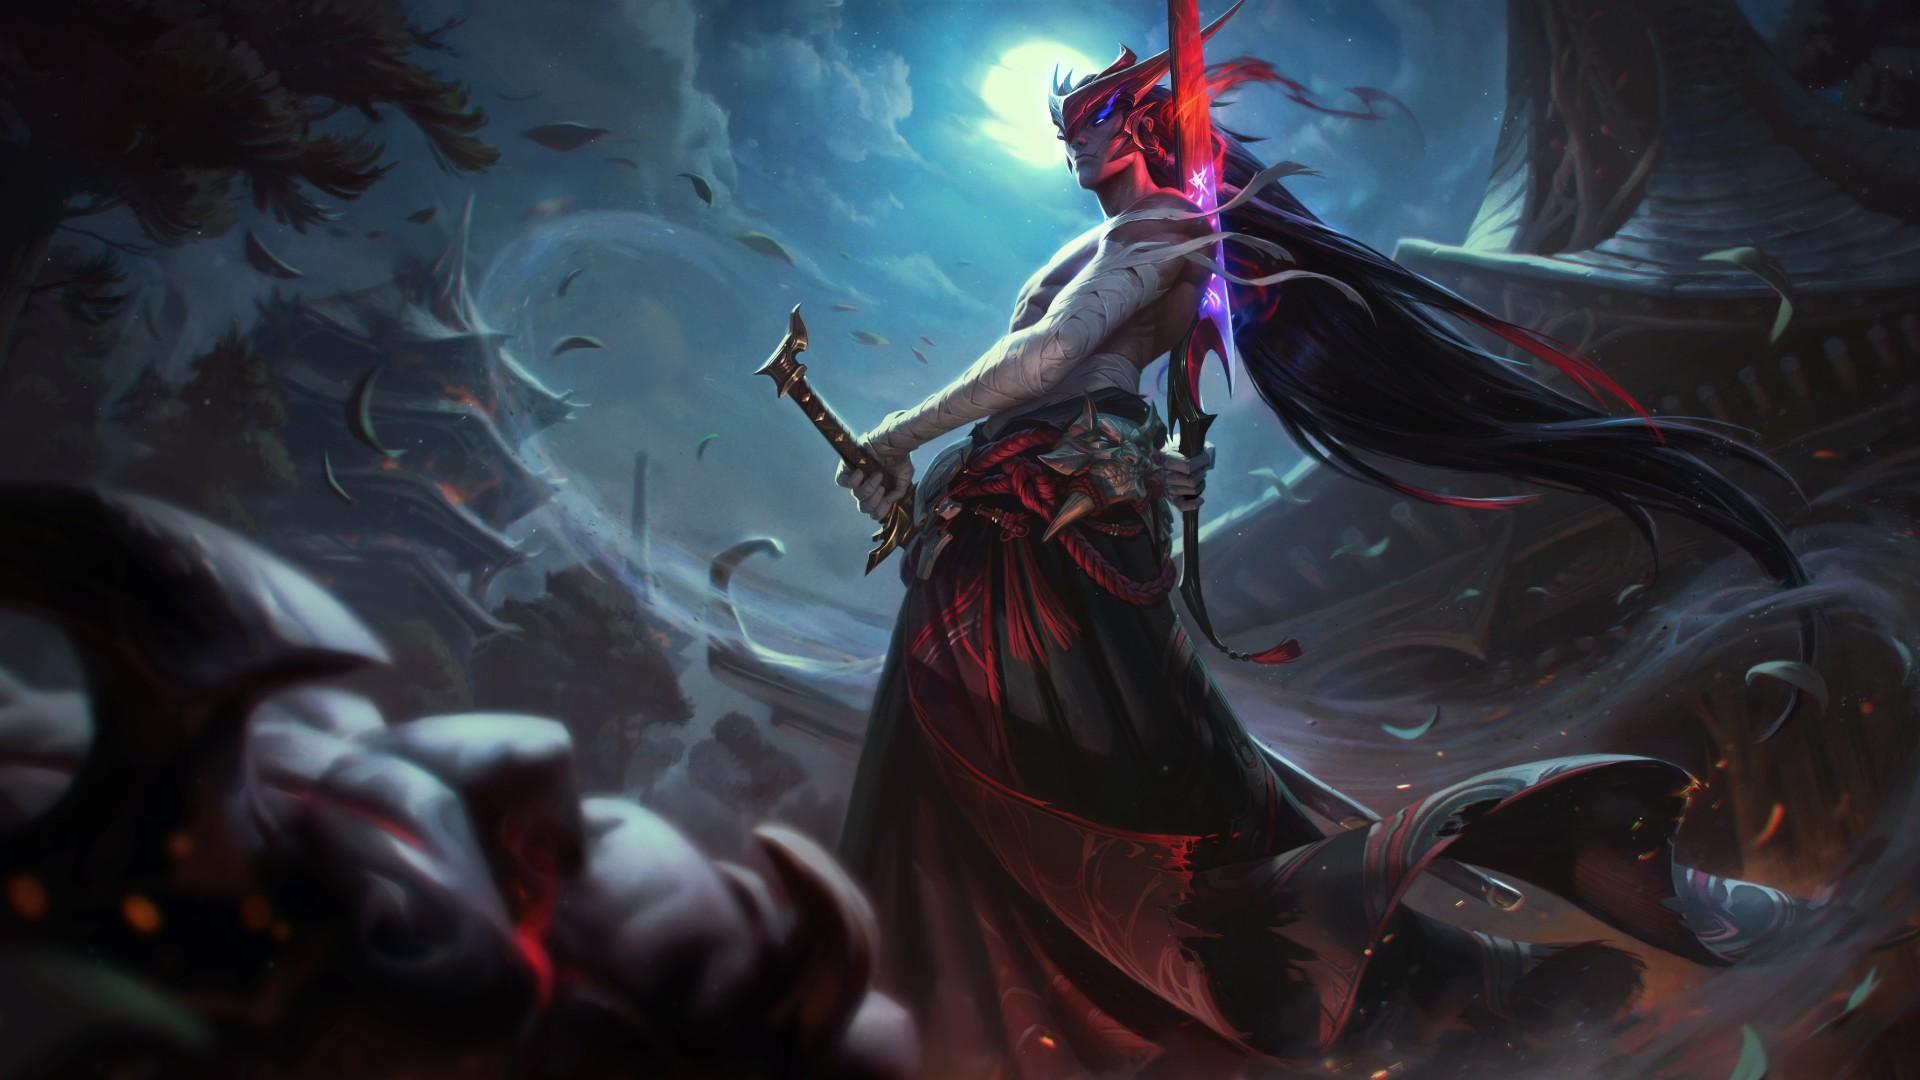 Yone is finally be released onto live servers in League of Legends Patch 10.16.